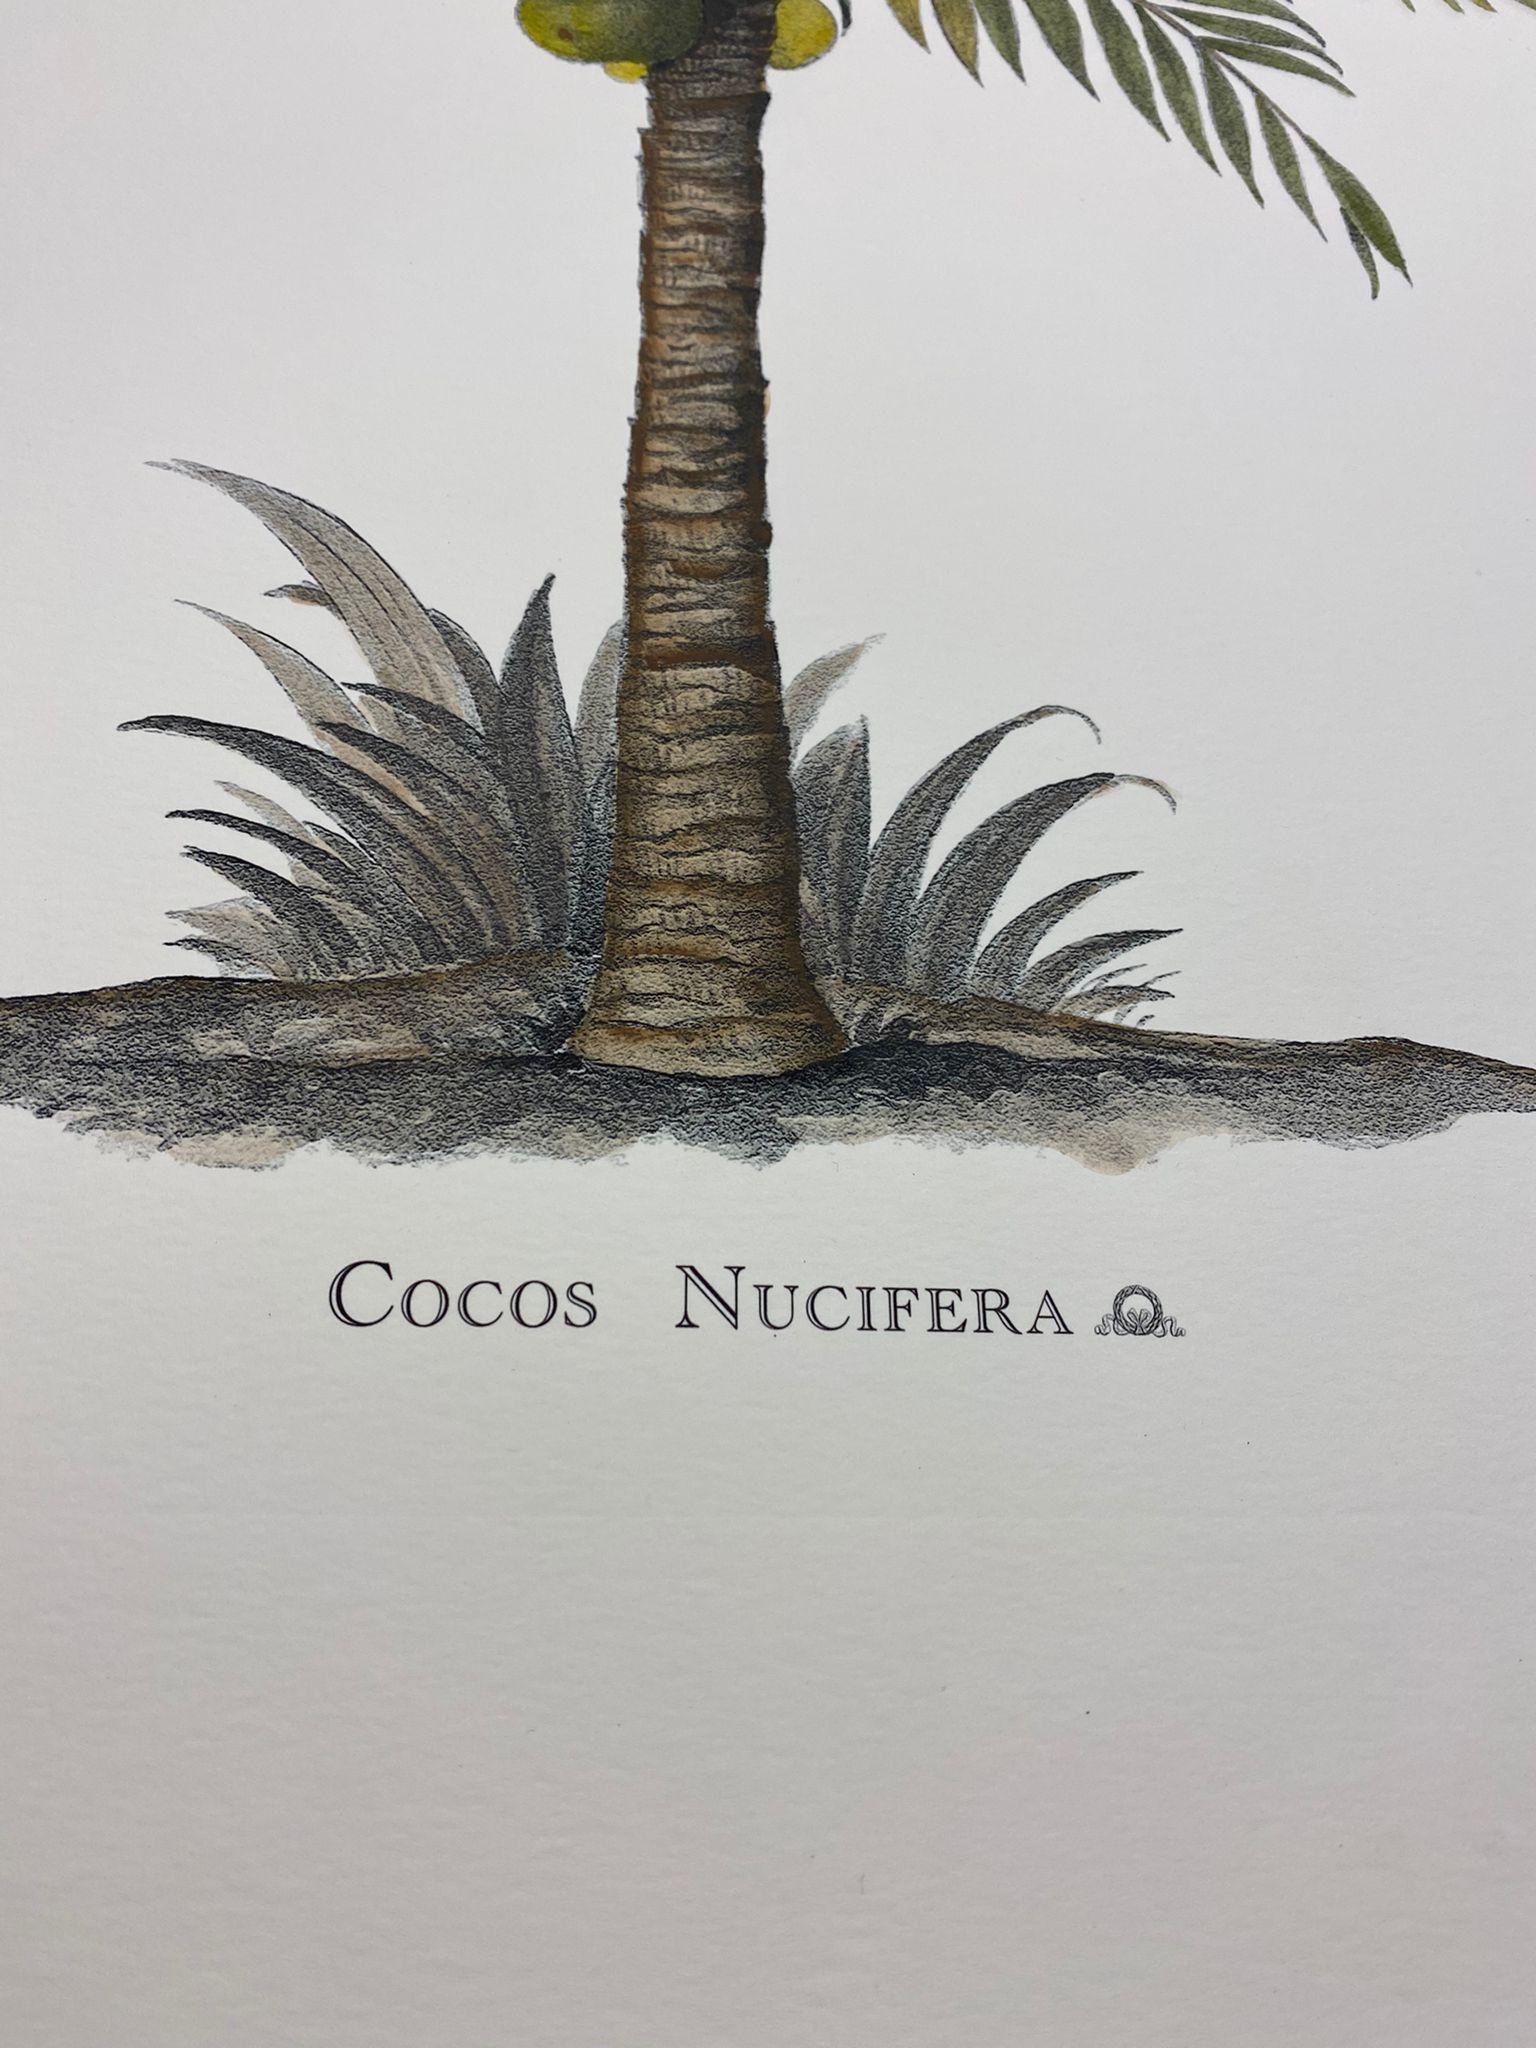 Elegant hand-watercoloured print representing Cocos Nucifera, of the palms family.

This botanical style print is available in 4 different natural representations to create a bright and joyful composition:
- Musa Paradisiaca
- Butia Capitata
-